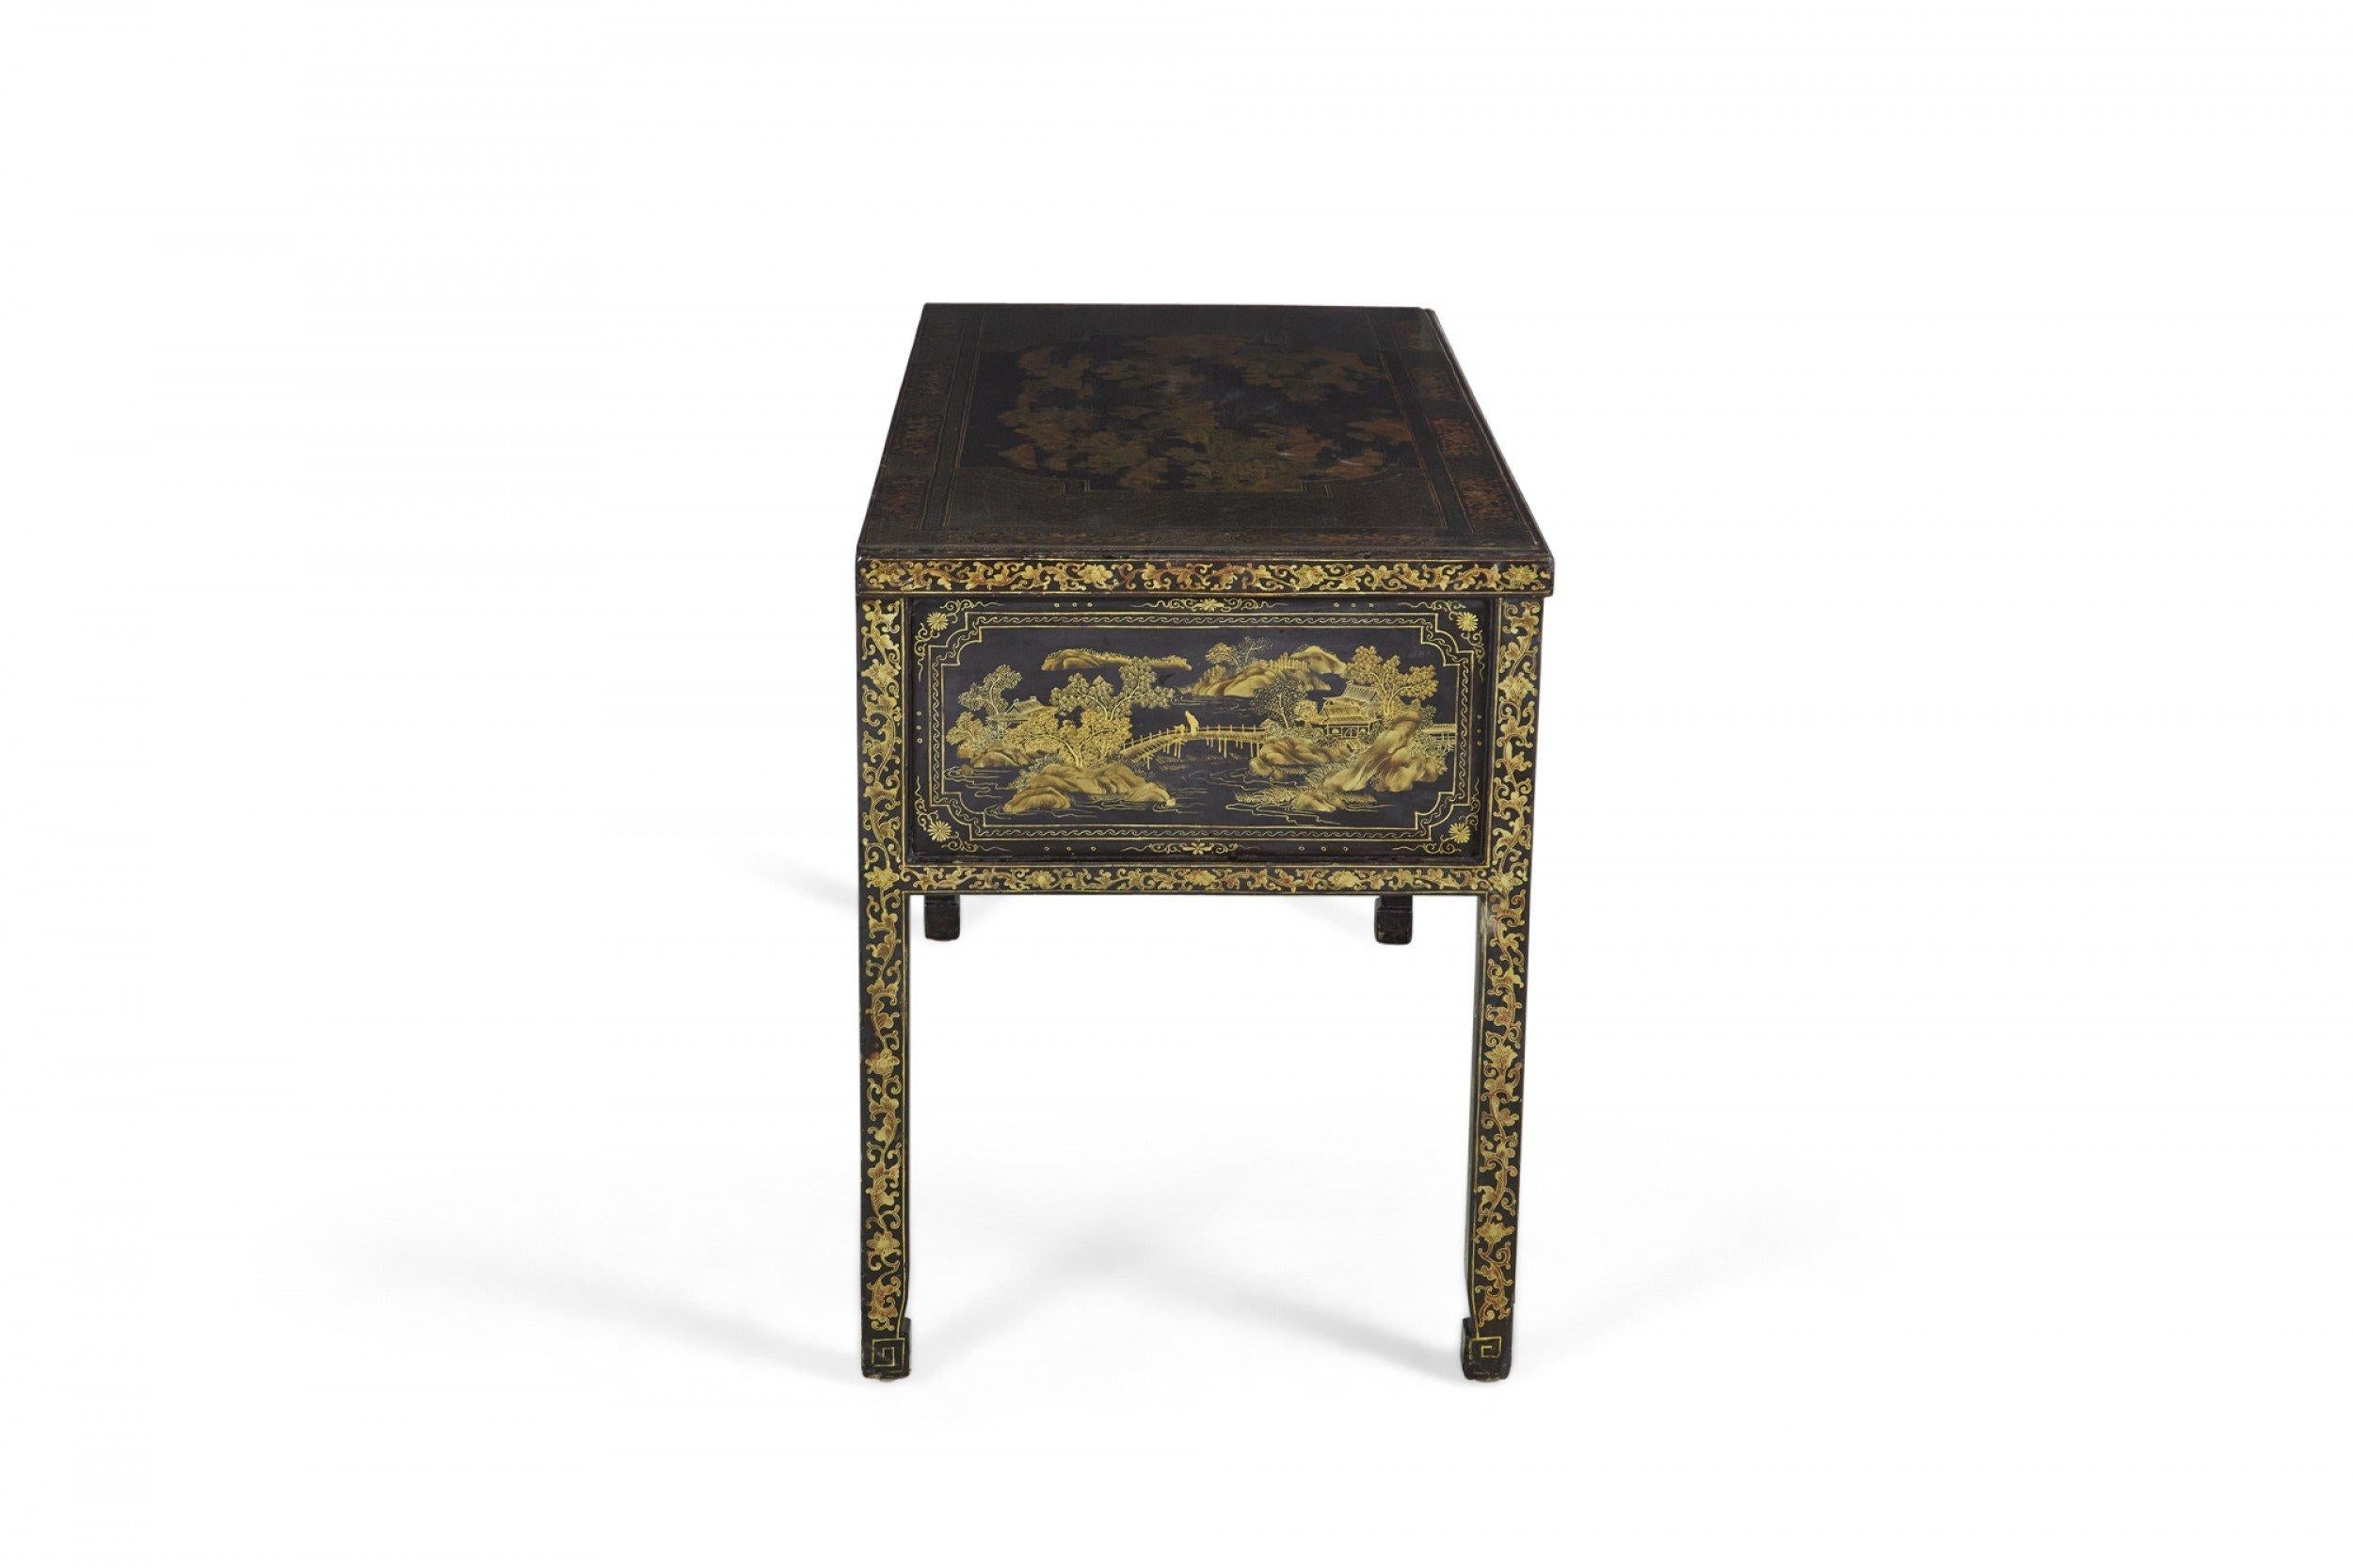 19th Century English Regency Chinese Export Gilt Black Lacquer Desk For Sale 3